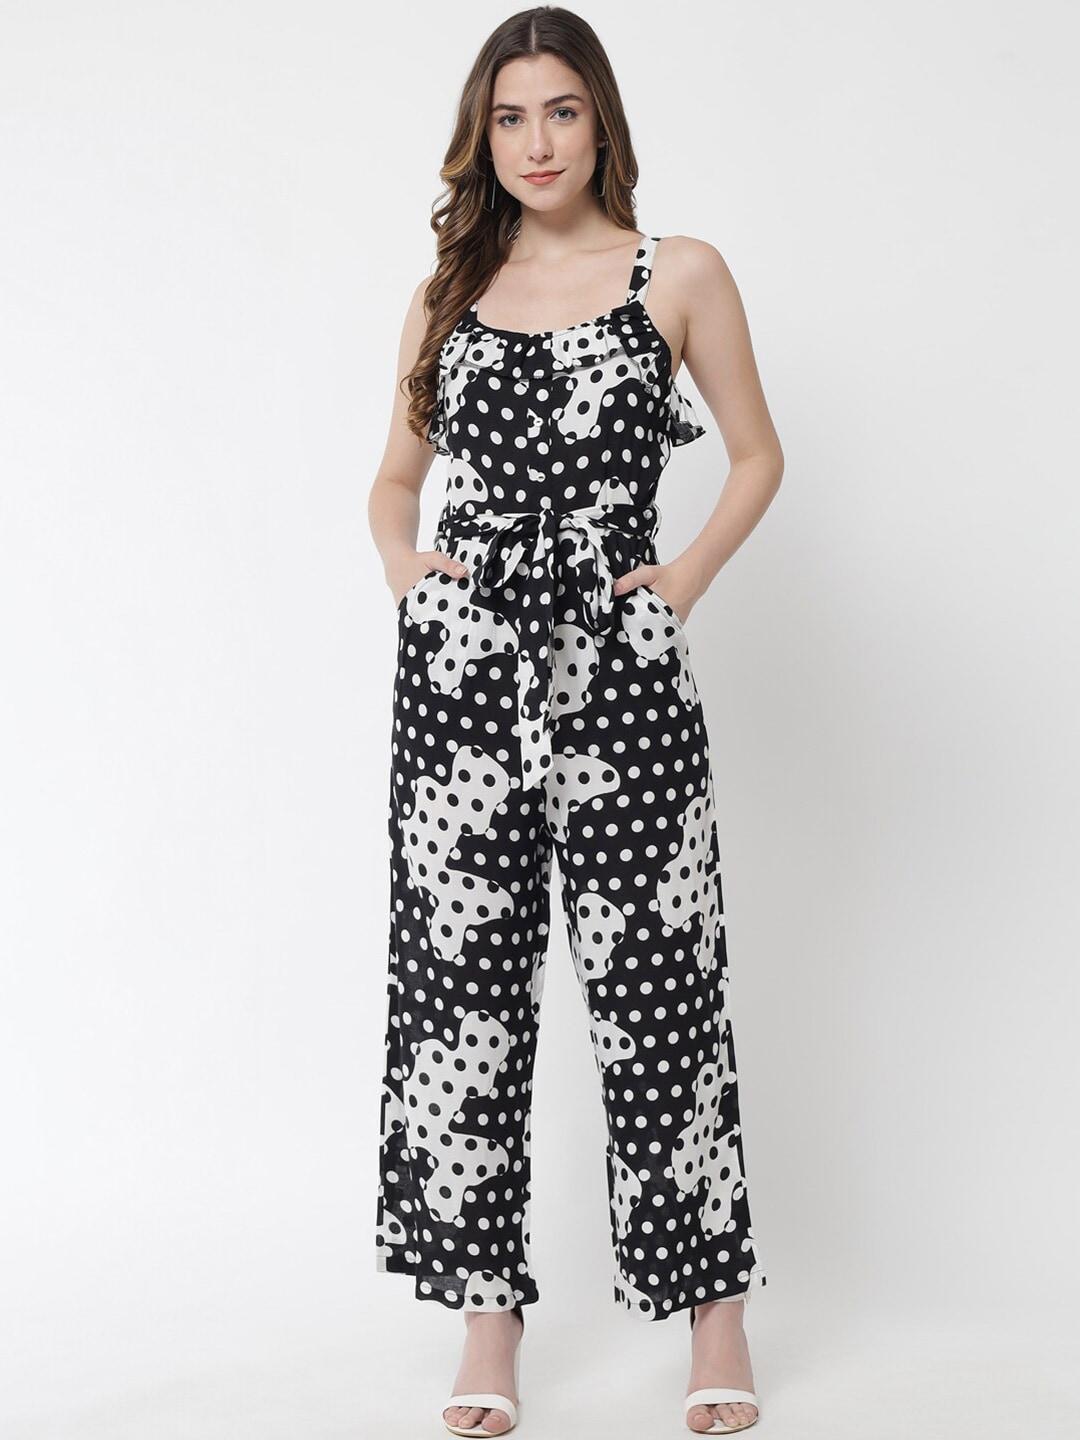 the dry state black & white polka dots printed cotton basic jumpsuit